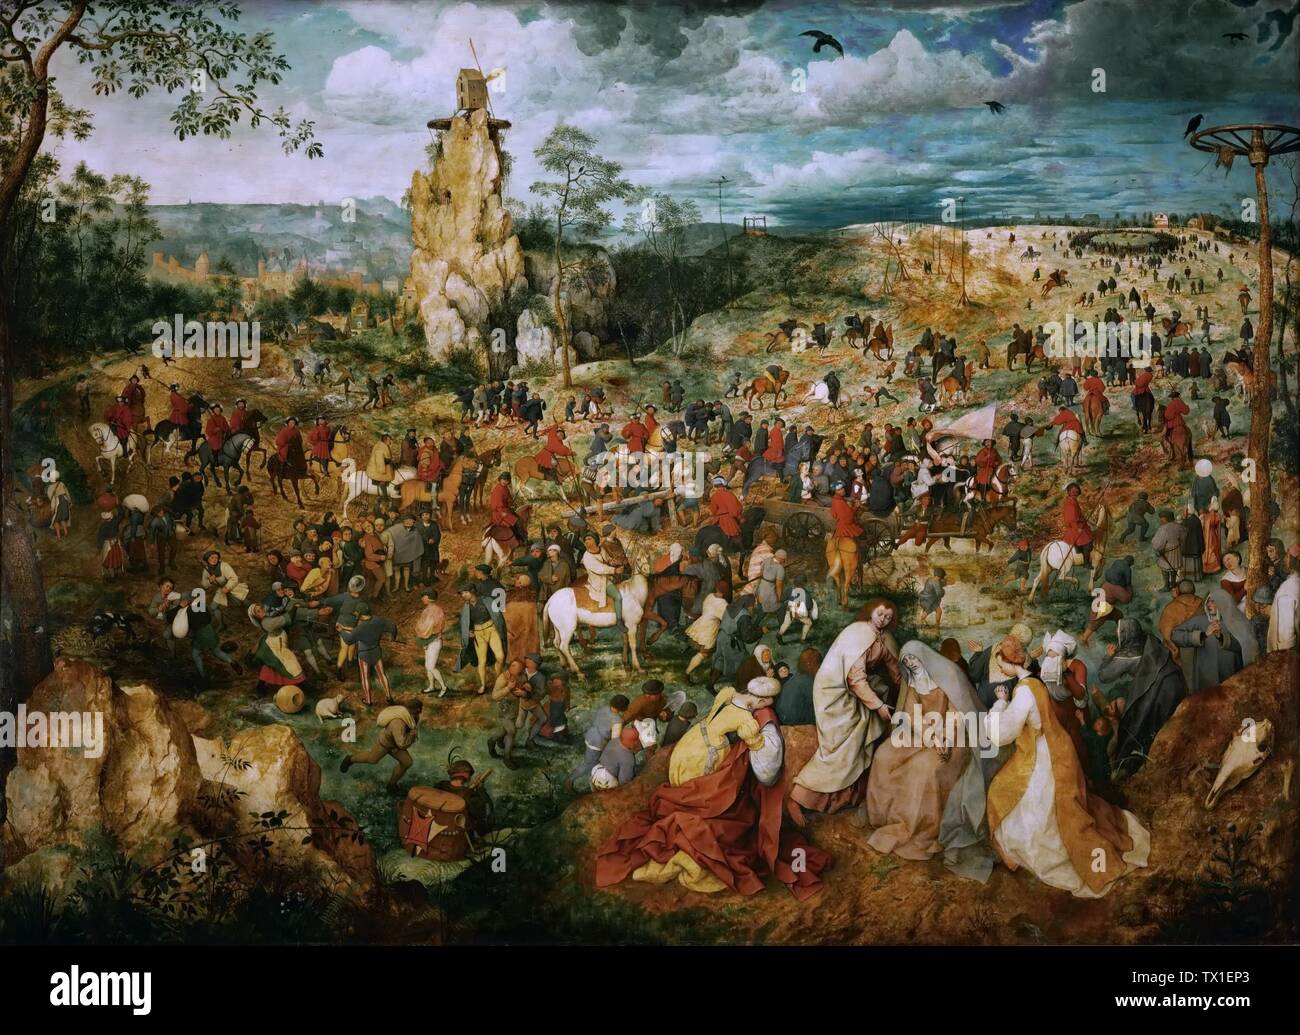 The Procession to Calvary by Pieter Bruegel (Brueghel) the Elder, 1564 - Very high quality and resolution image Stock Photo